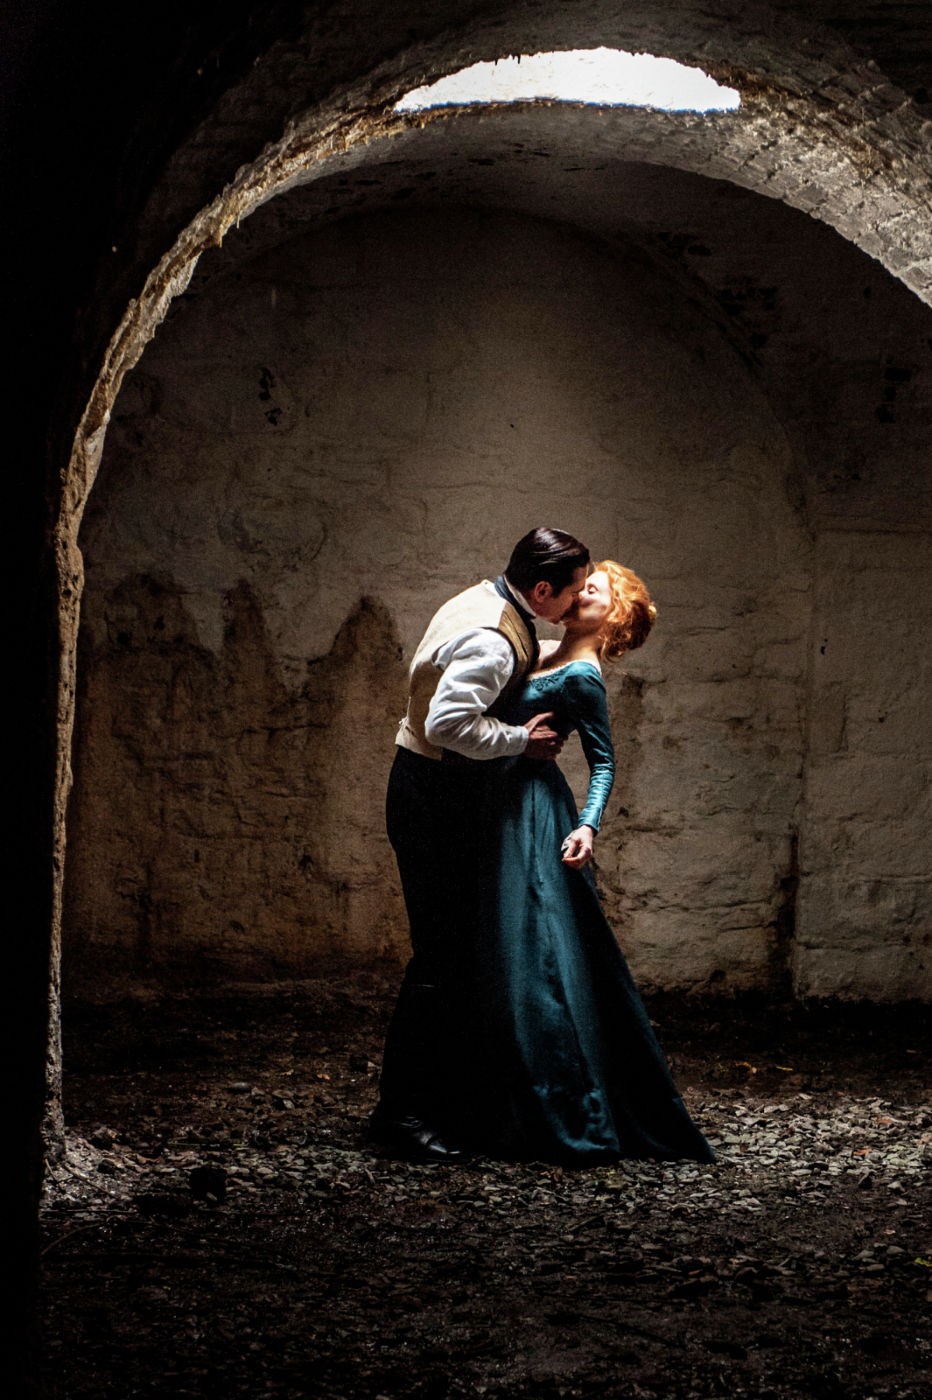 Colin Farrell stars as John and Jessica Chastain stars as Miss Julie in Wrekin Hill Entertainment's Miss Julie (2014)